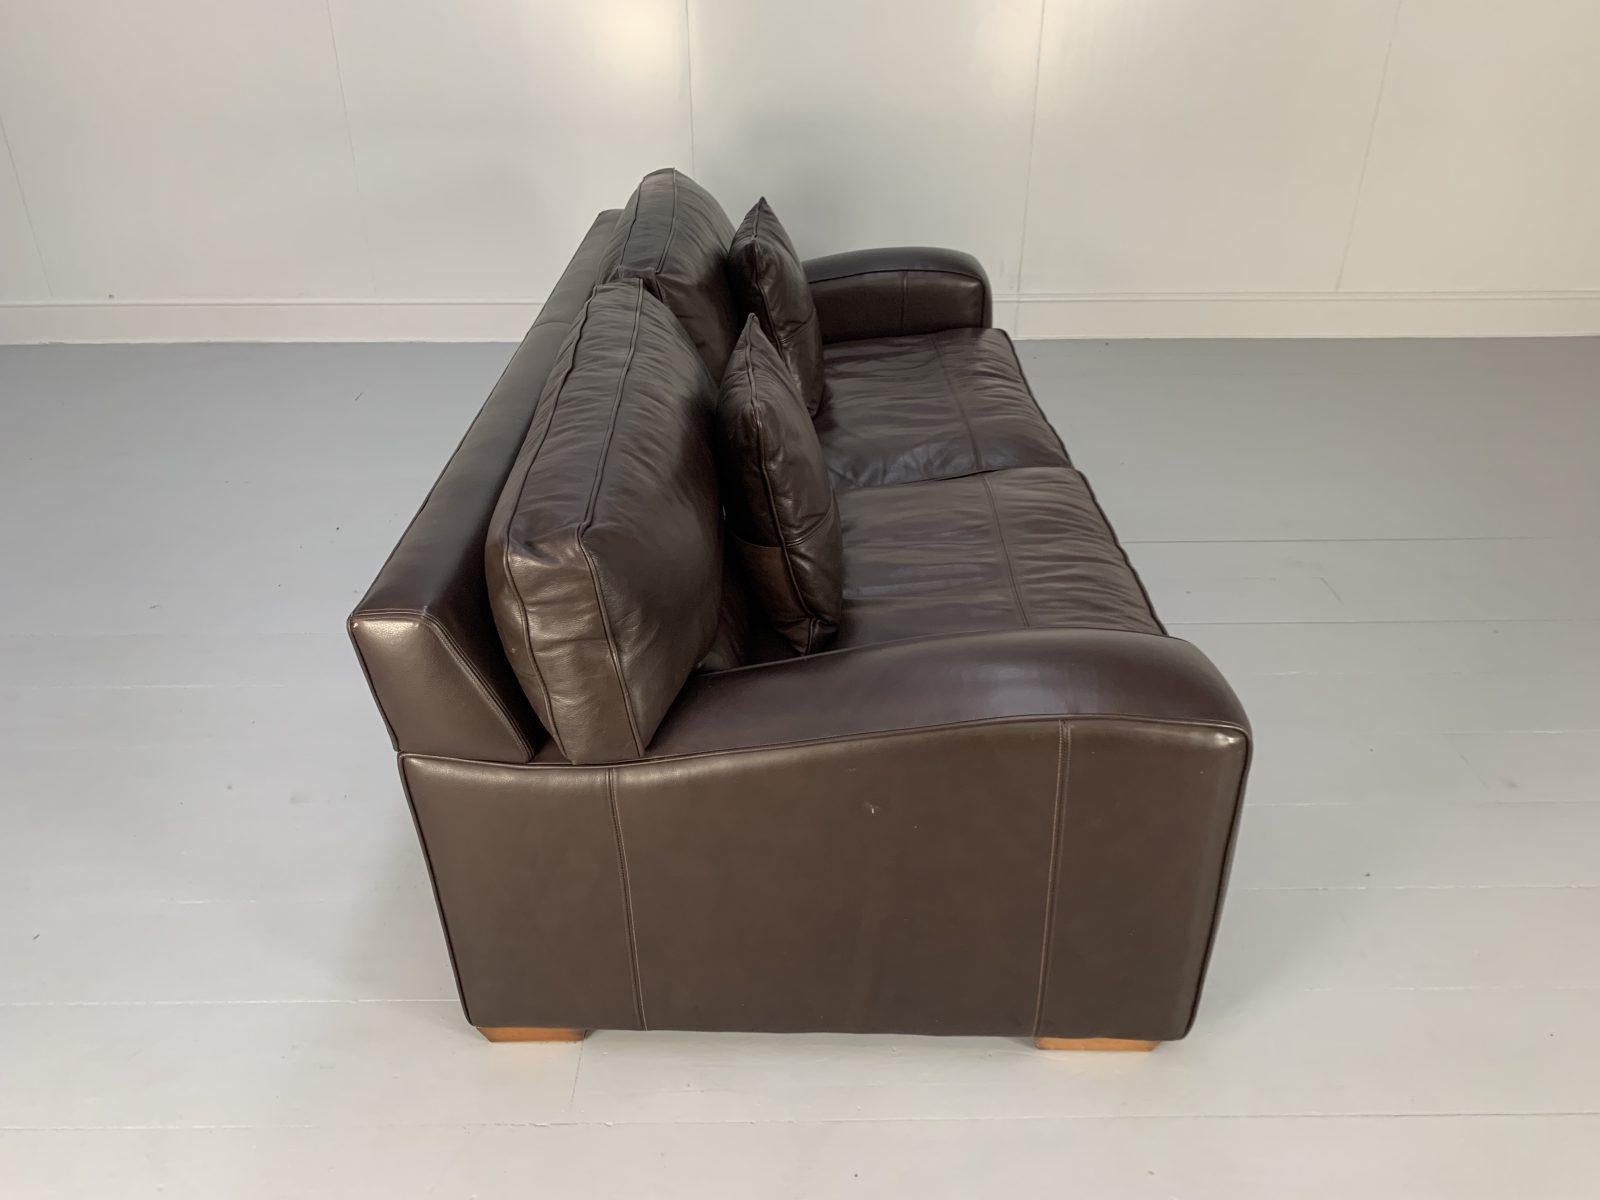 Duresta “Panther” Grand 3-Seat Sofa, in Dark Brown Leather For Sale 1